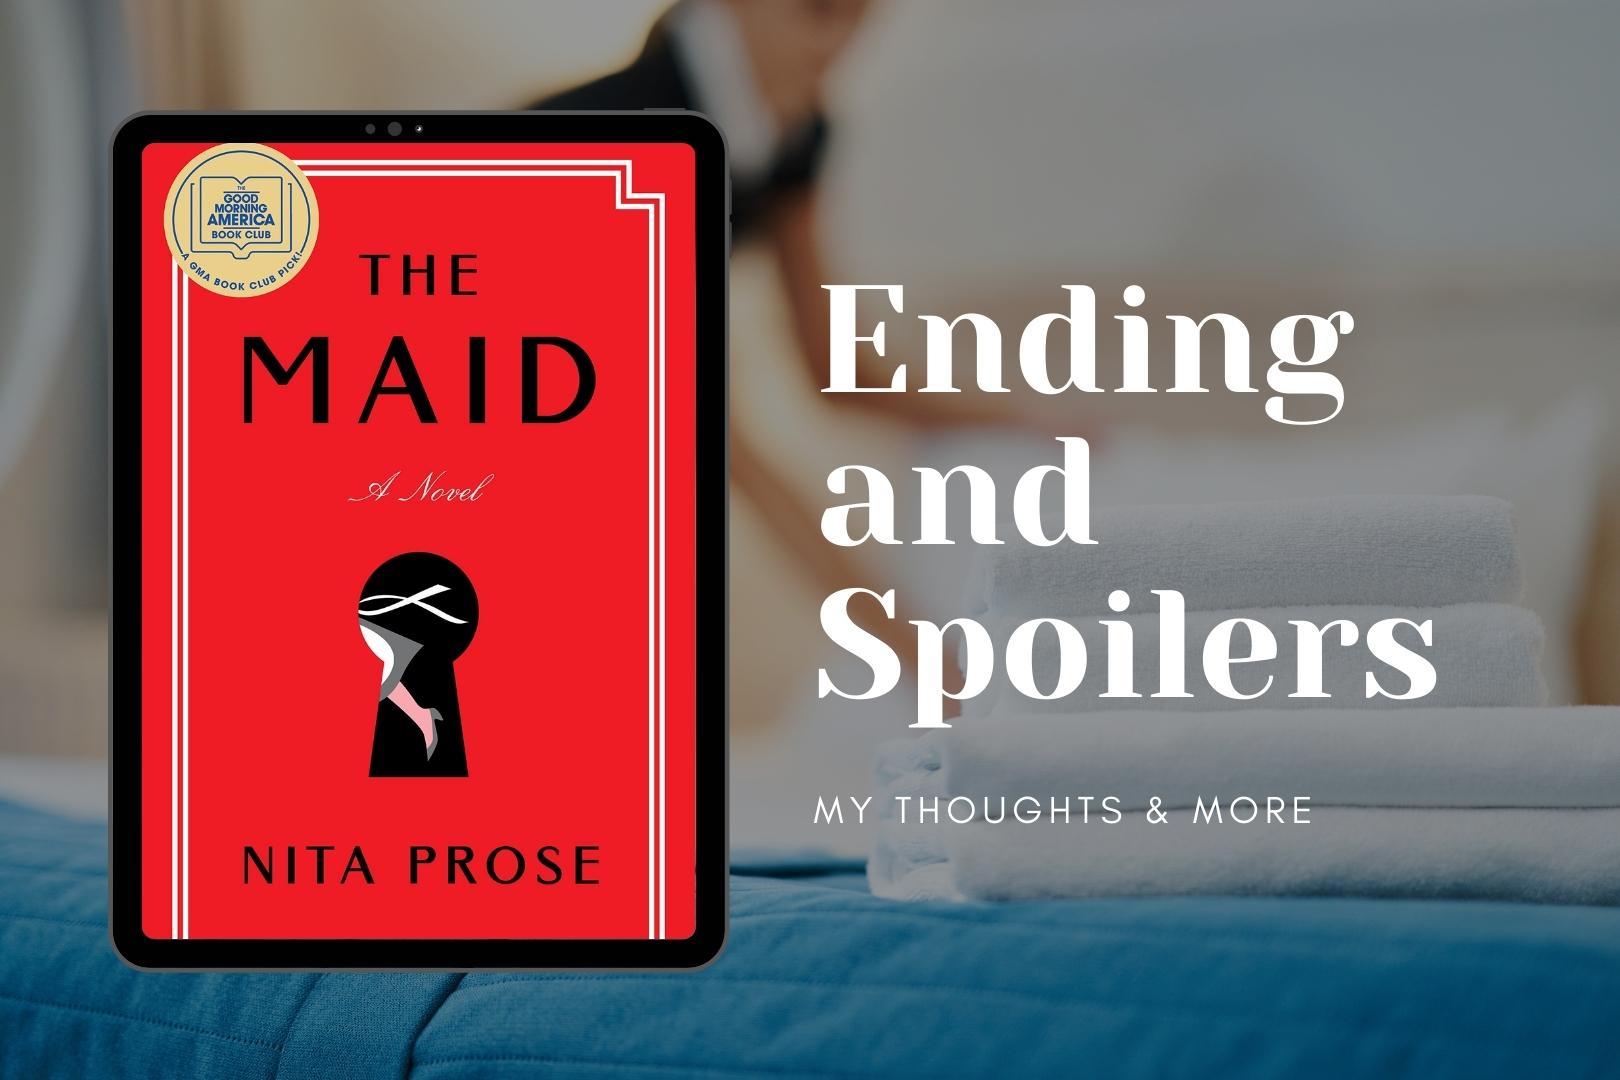 Discussing The Maid by Nita Prose: Ending and Other Spoilers